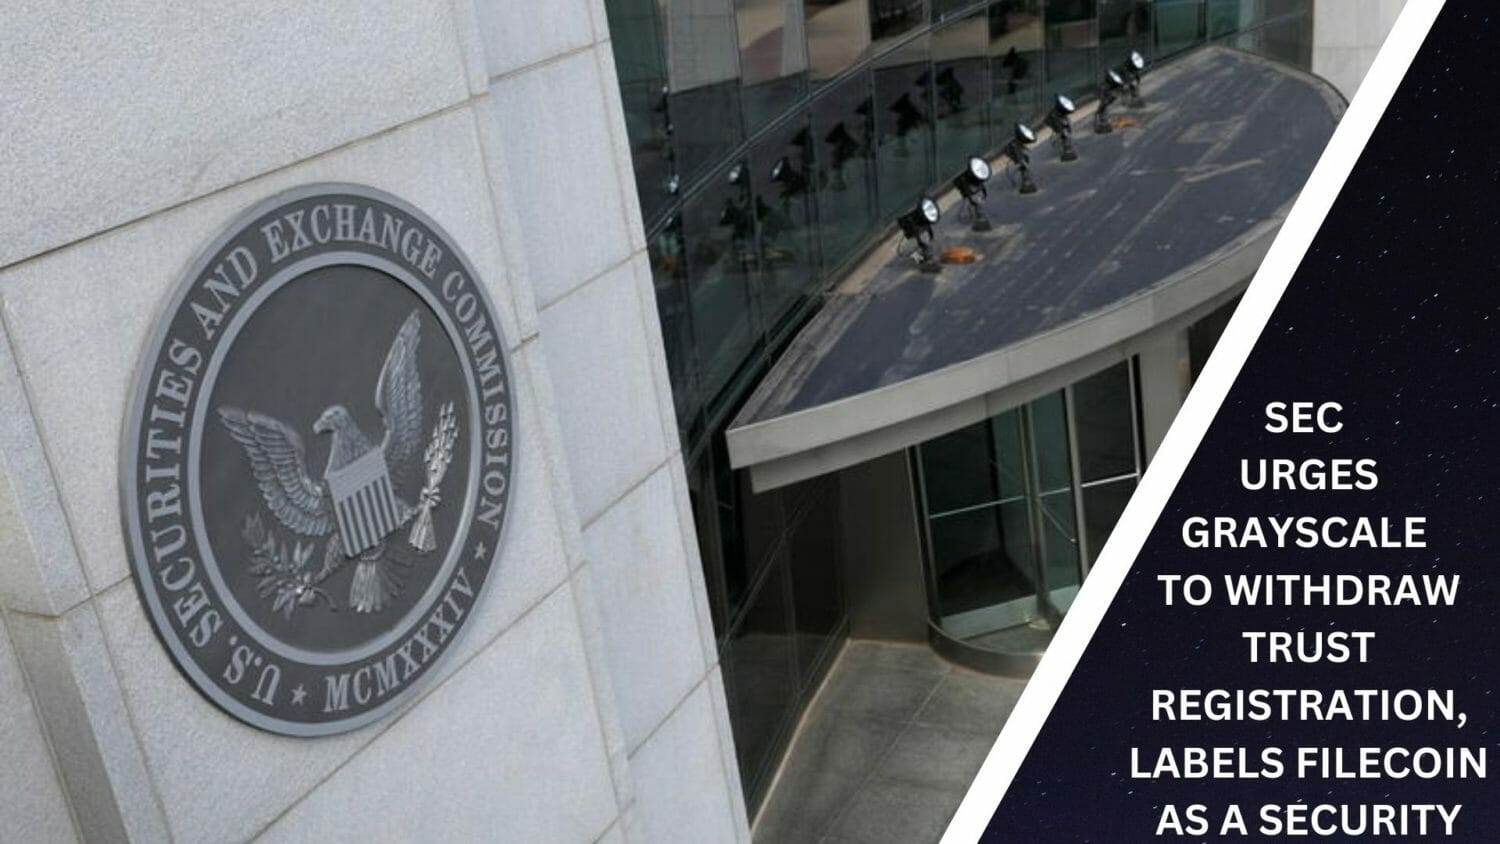 Sec Urges Grayscale To Withdraw Trust Registration, Labels Filecoin As A Security